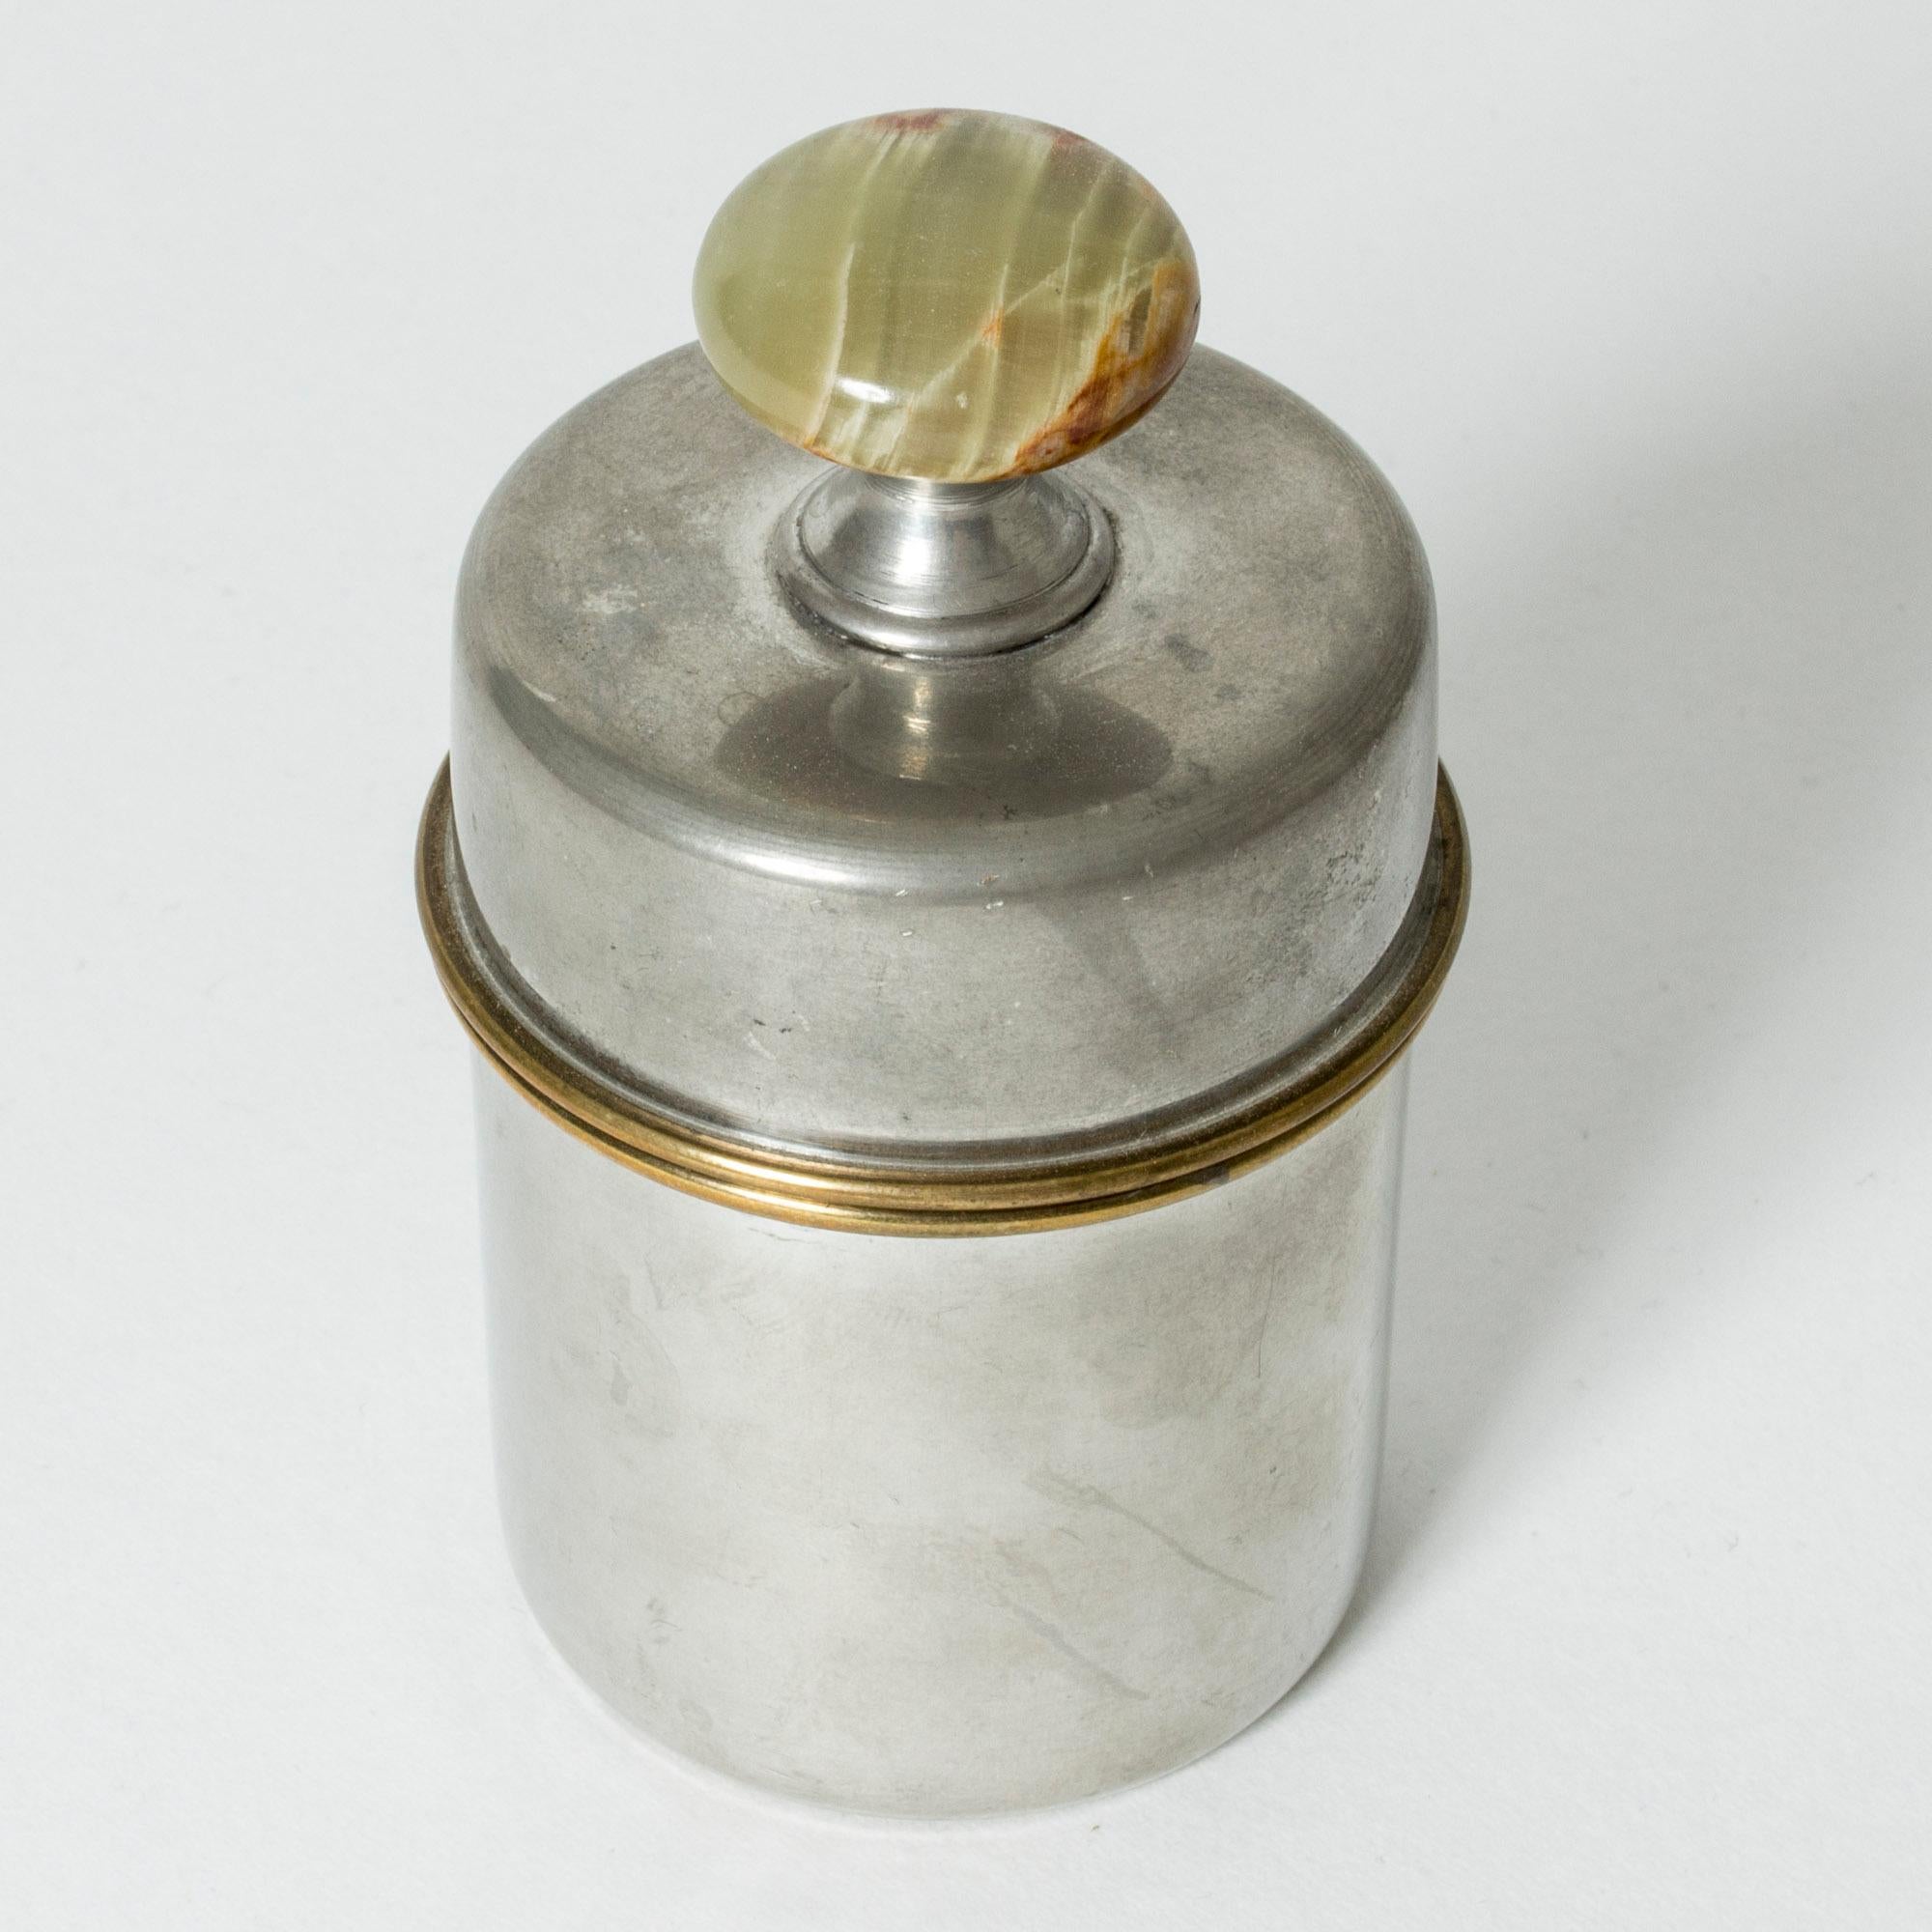 Lovely pewter jar by Estrid Ericson, in a cylinder form. Brass rims around the edges, adorned with an elevated, green agate stone in a knob form.